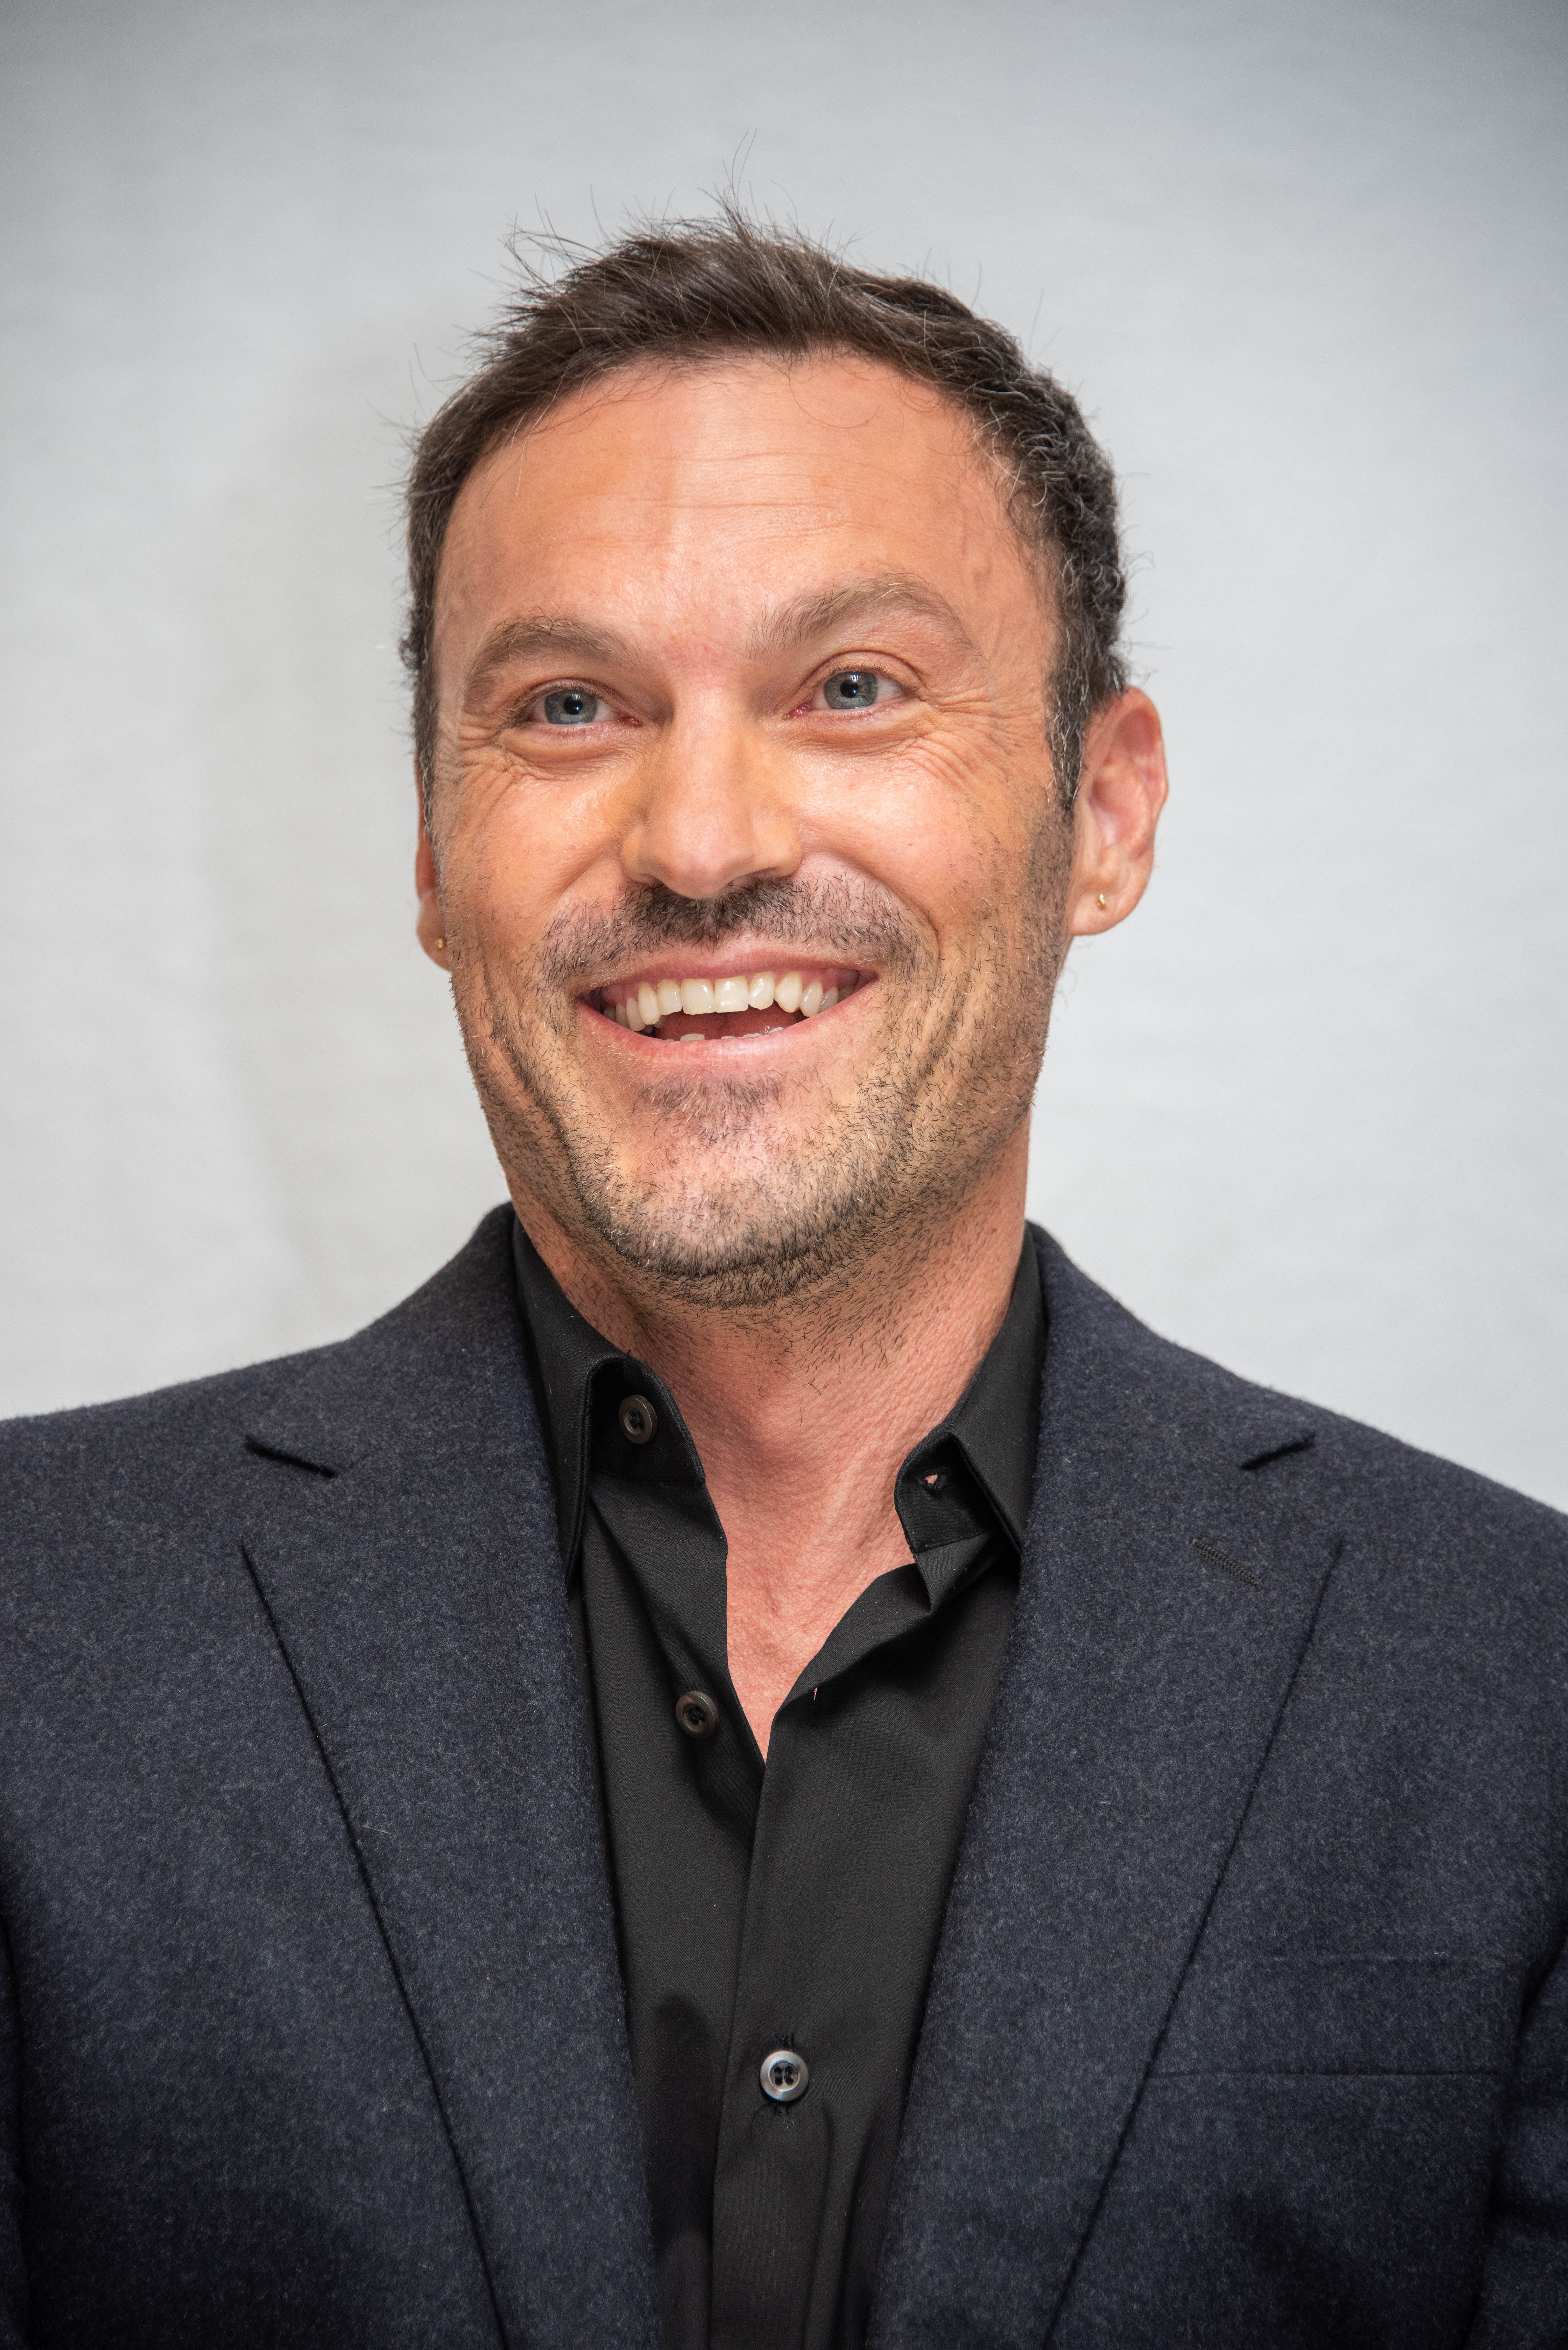 Brian Austin Green at the "BH90210" Press Conference at the Four Seasons Hotel on August 8, 2019 in Beverly Hills, California | Source: Getty Images